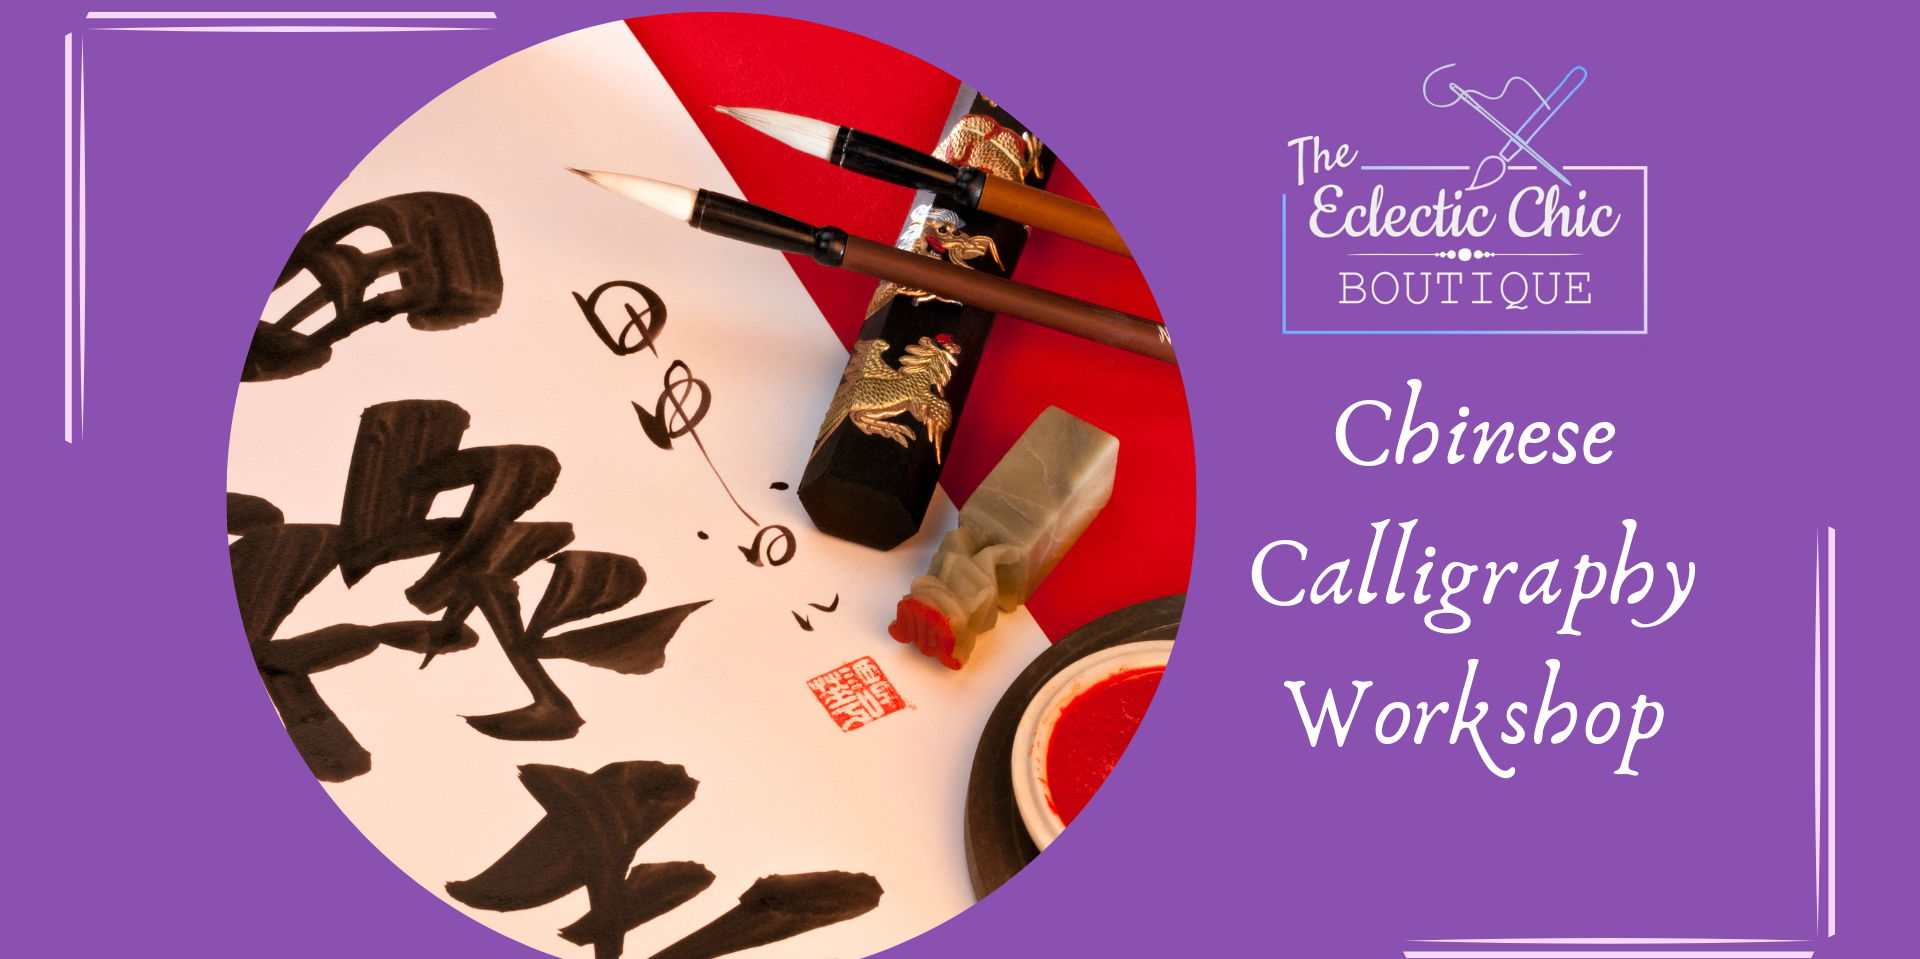 Chinese Calligraphy Workshop promotional image